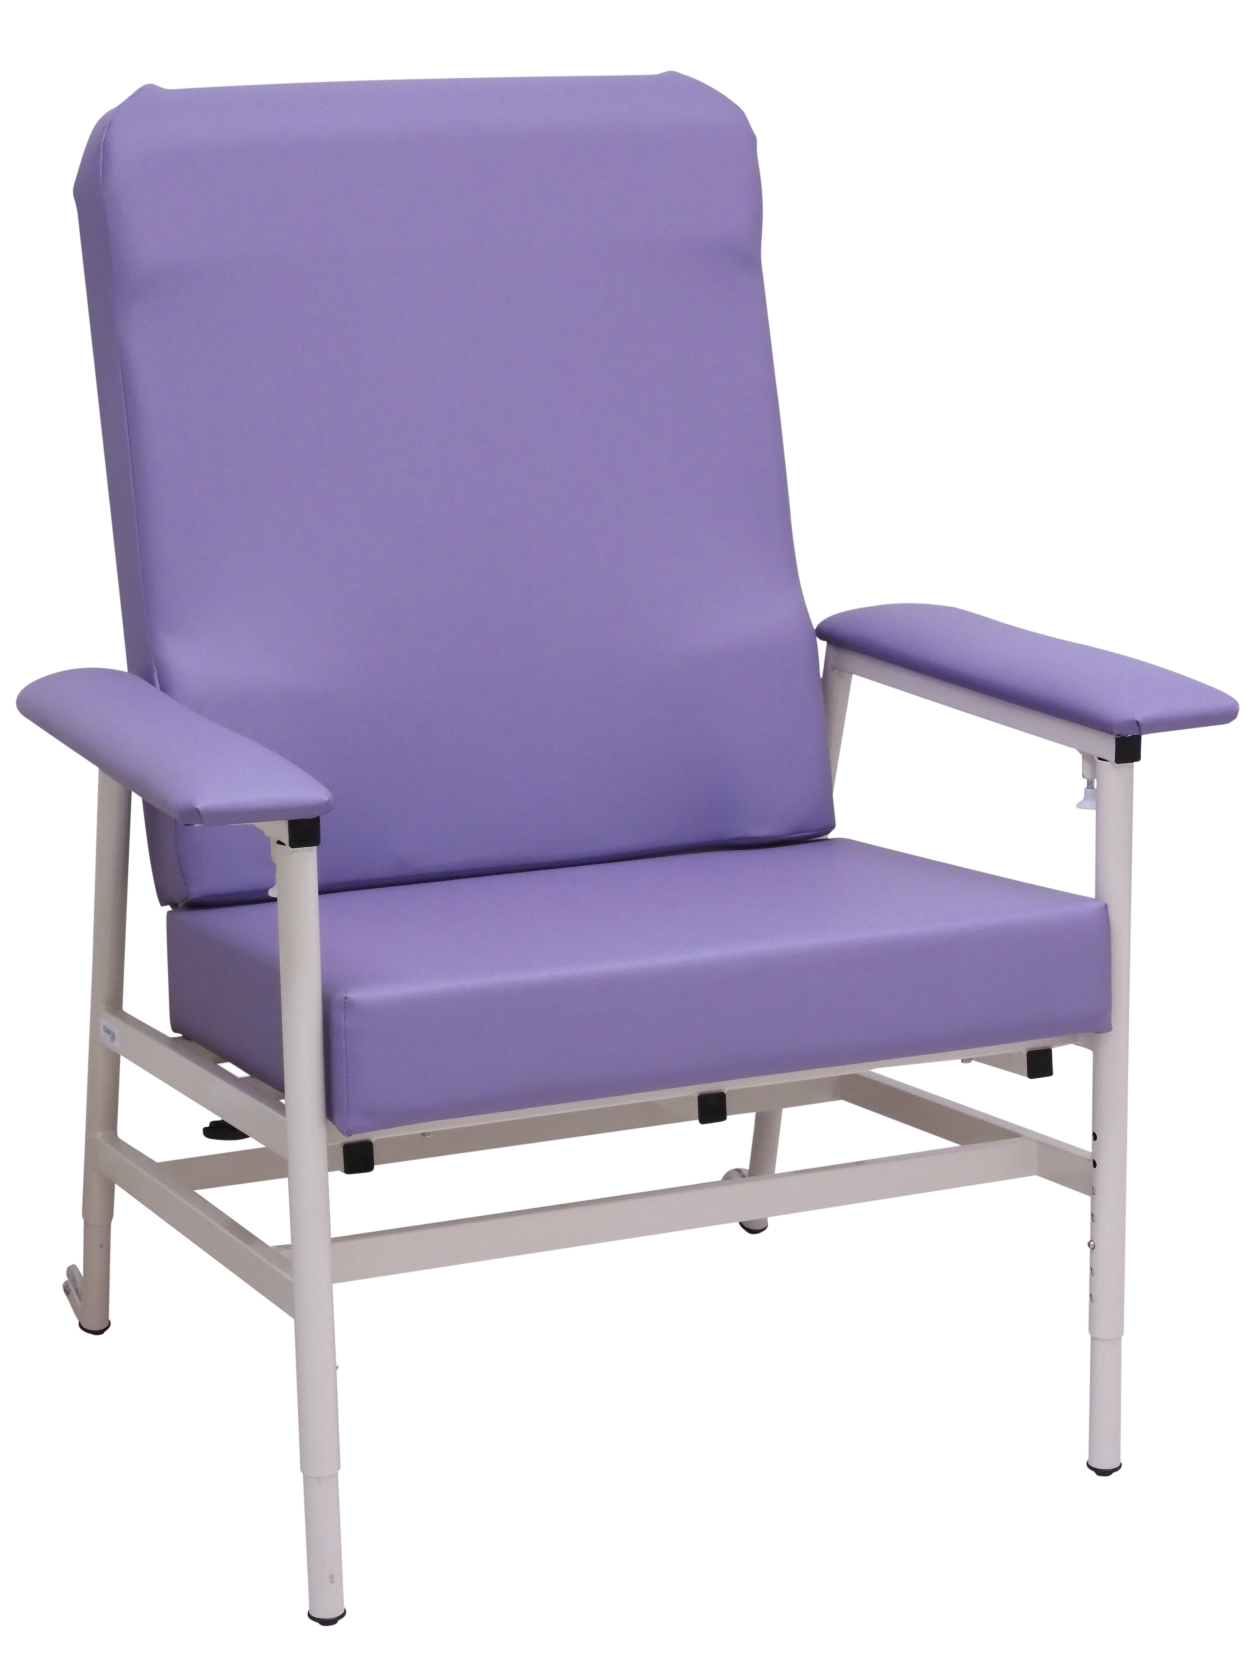 Bariatric ward chair from Caremed Alrick